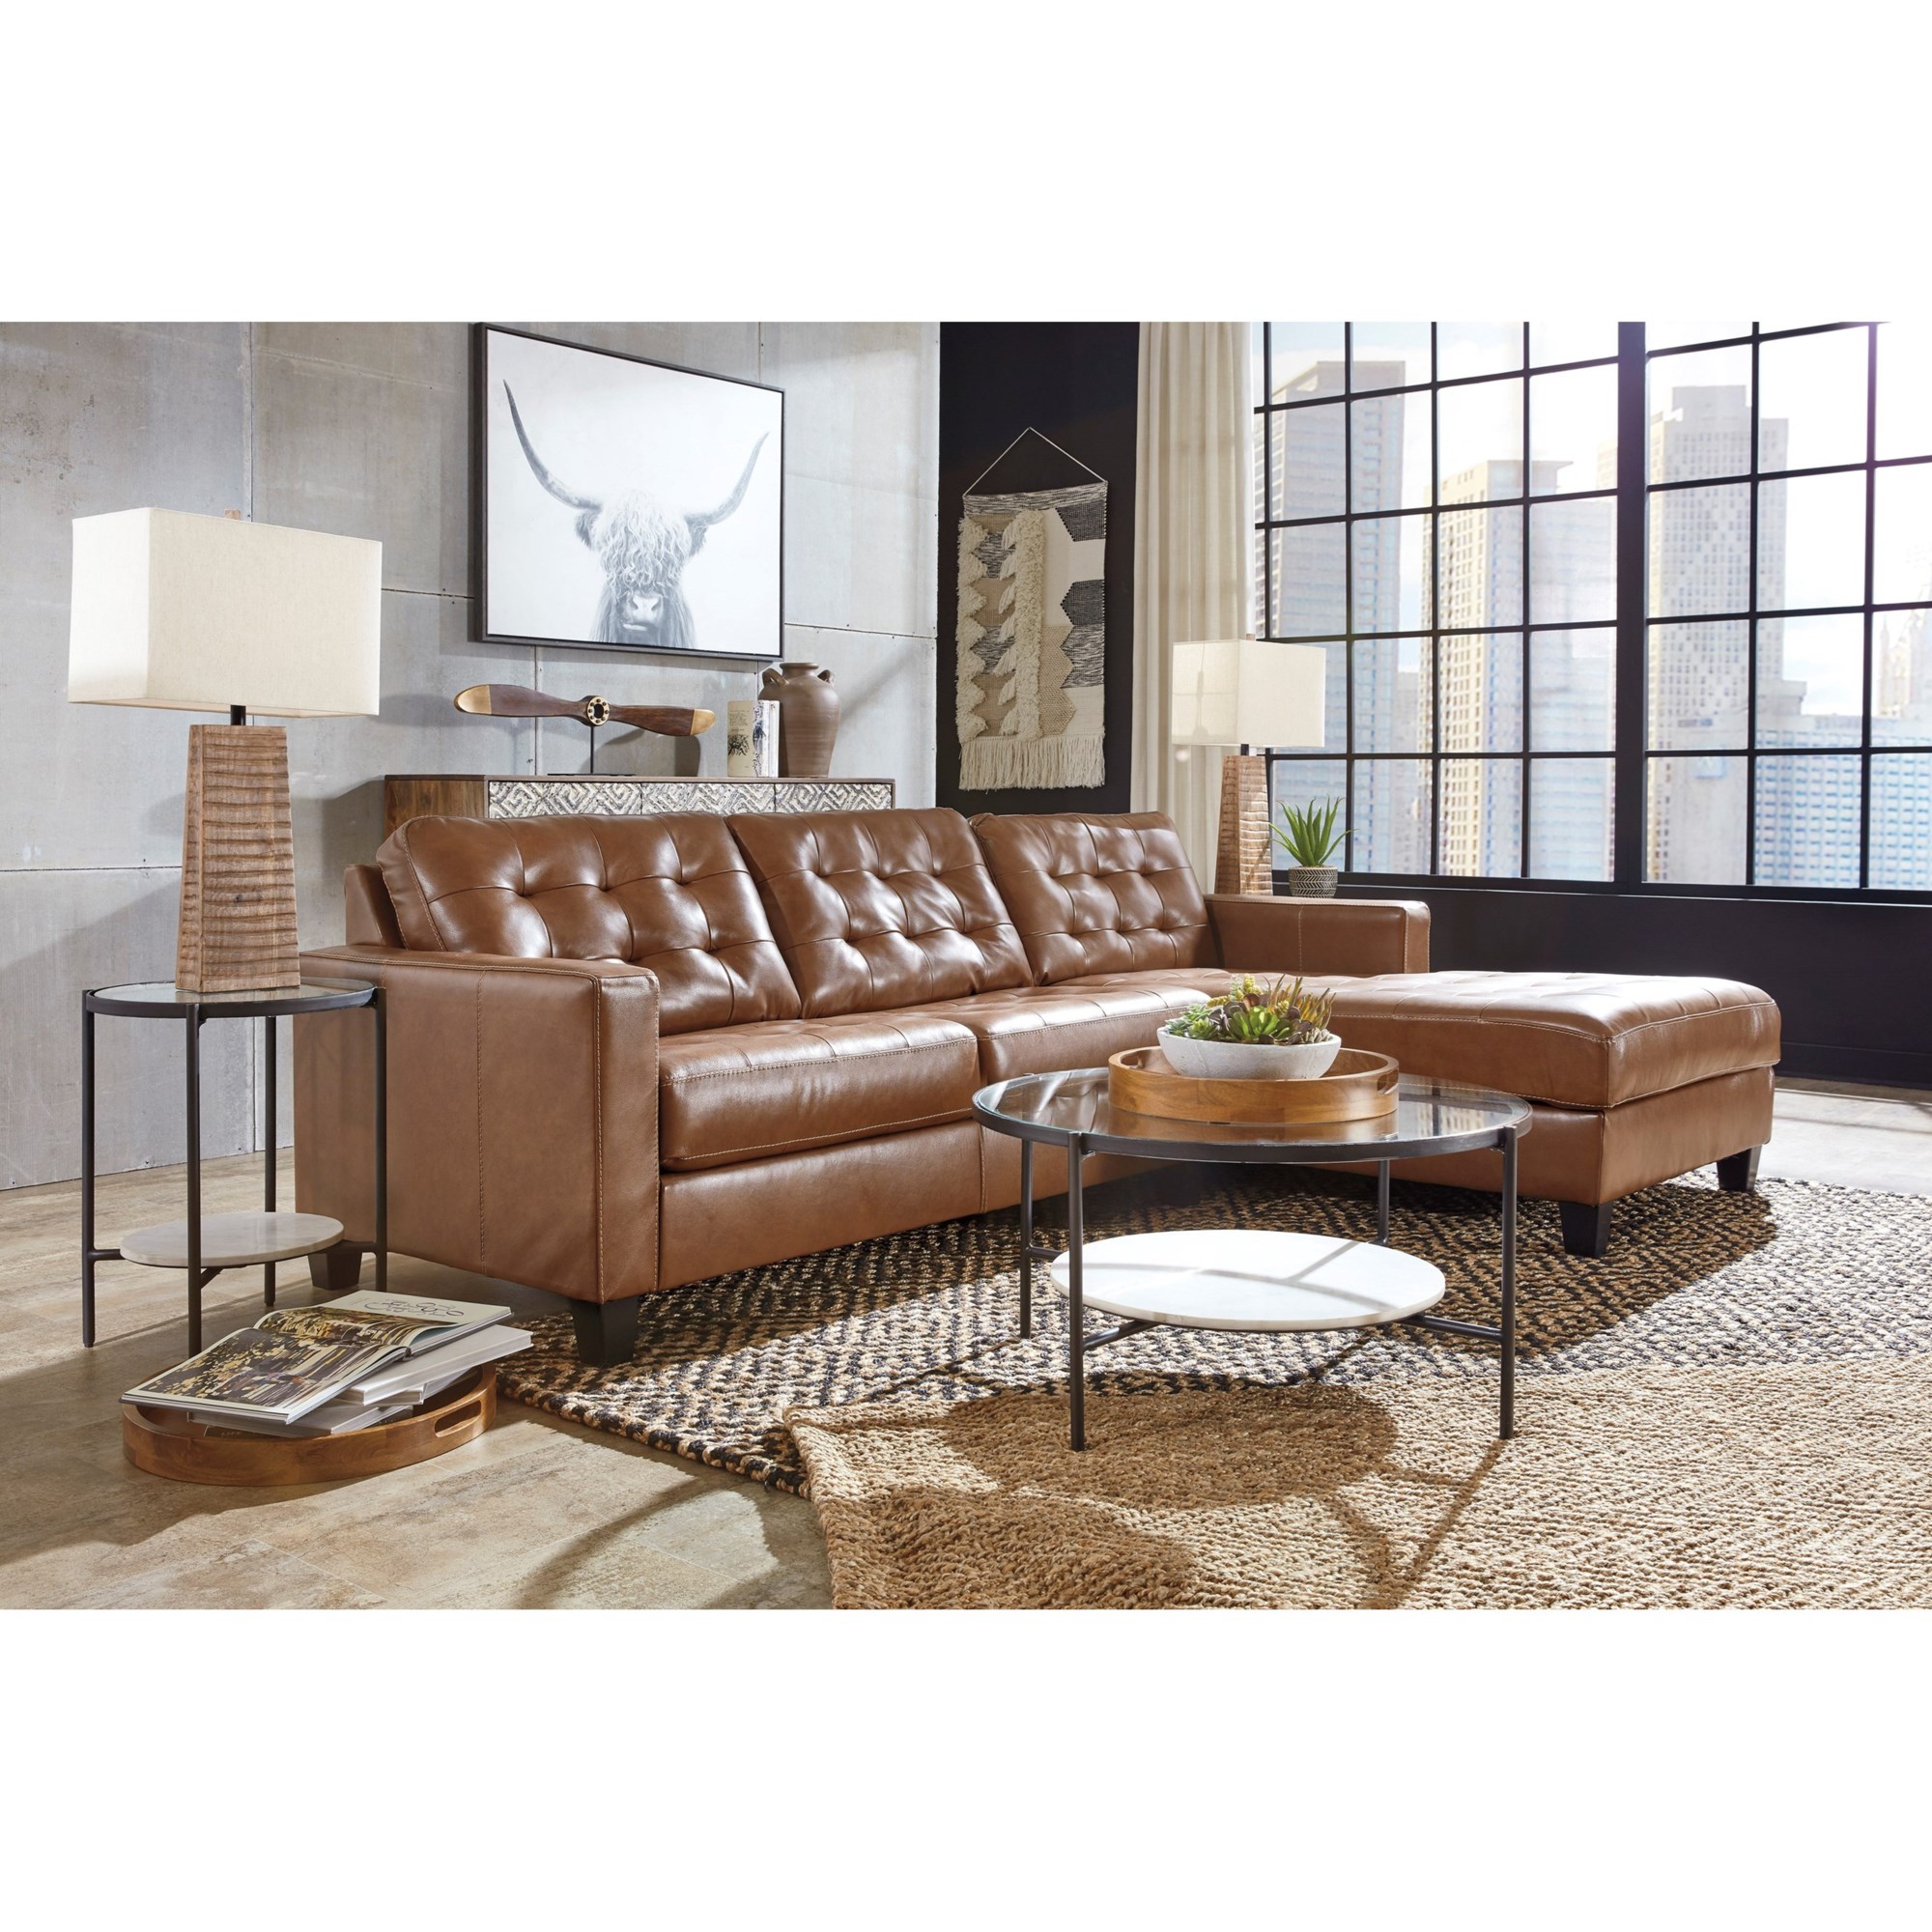 Signature Design by Sofa Ashley Leather Chaise and | 2-Piece with Match Baskove Sectional Sectional Tufting - | Groups 11102S3 ApplianceMart and Furniture